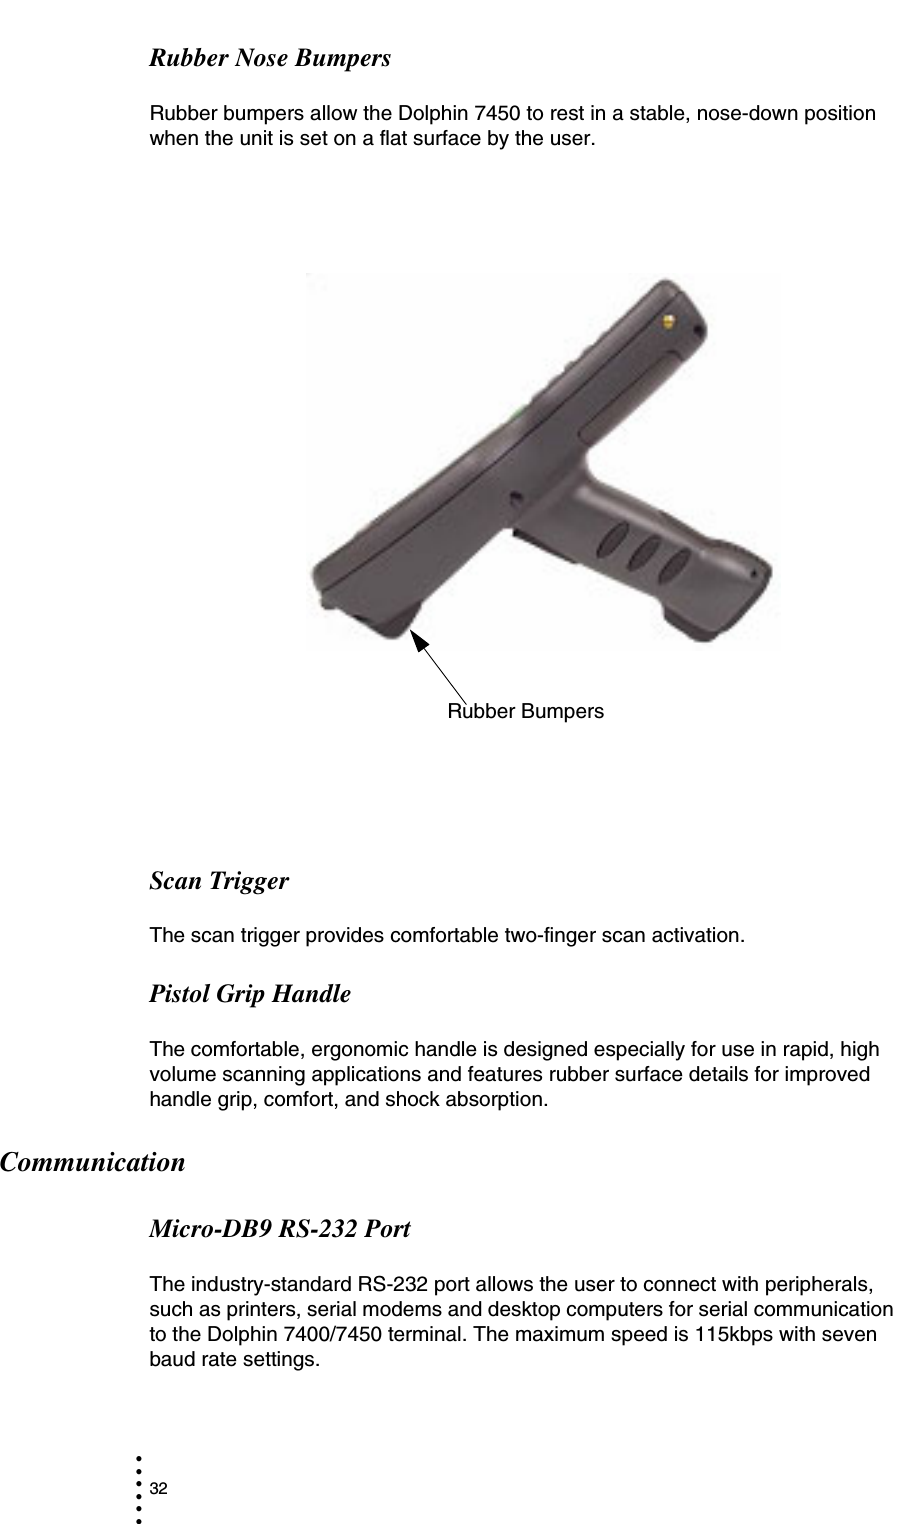 32• • • •••Rubber Nose BumpersRubber bumpers allow the Dolphin 7450 to rest in a stable, nose-down position  when the unit is set on a flat surface by the user.Scan TriggerThe scan trigger provides comfortable two-finger scan activation.Pistol Grip HandleThe comfortable, ergonomic handle is designed especially for use in rapid, high volume scanning applications and features rubber surface details for improved handle grip, comfort, and shock absorption.CommunicationMicro-DB9 RS-232 PortThe industry-standard RS-232 port allows the user to connect with peripherals, such as printers, serial modems and desktop computers for serial communication to the Dolphin 7400/7450 terminal. The maximum speed is 115kbps with seven baud rate settings.Rubber Bumpers